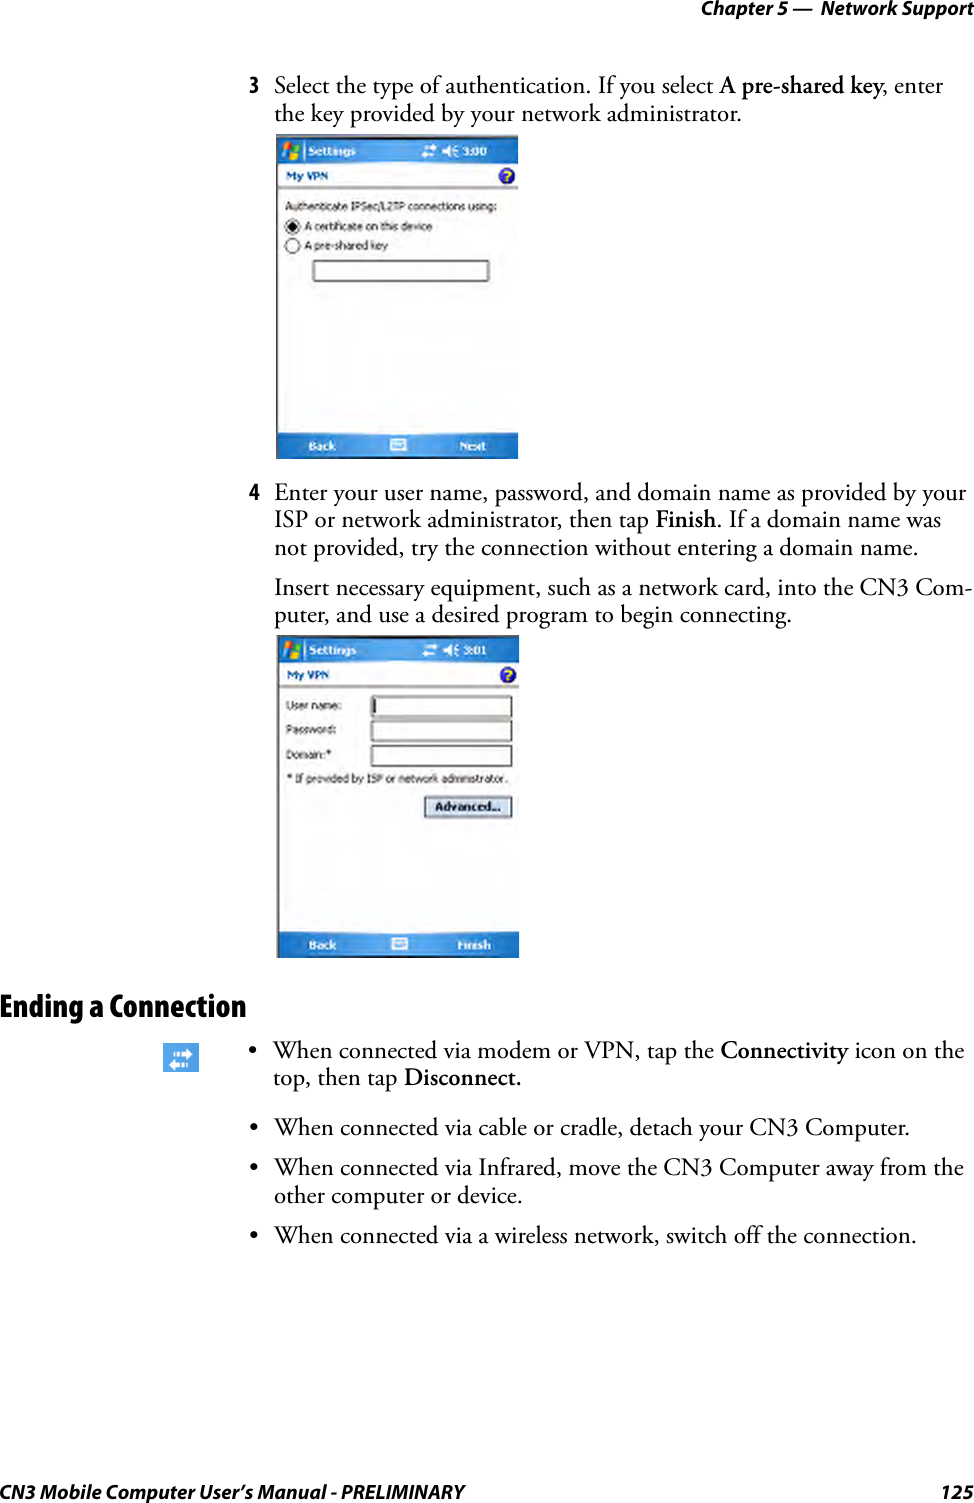 Chapter 5 —  Network SupportCN3 Mobile Computer User’s Manual - PRELIMINARY 1253Select the type of authentication. If you select A pre-shared key, enter the key provided by your network administrator.4Enter your user name, password, and domain name as provided by your ISP or network administrator, then tap Finish. If a domain name was not provided, try the connection without entering a domain name.Insert necessary equipment, such as a network card, into the CN3 Com-puter, and use a desired program to begin connecting.Ending a Connection• When connected via cable or cradle, detach your CN3 Computer.• When connected via Infrared, move the CN3 Computer away from the other computer or device.• When connected via a wireless network, switch off the connection.• When connected via modem or VPN, tap the Connectivity icon on the top, then tap Disconnect.